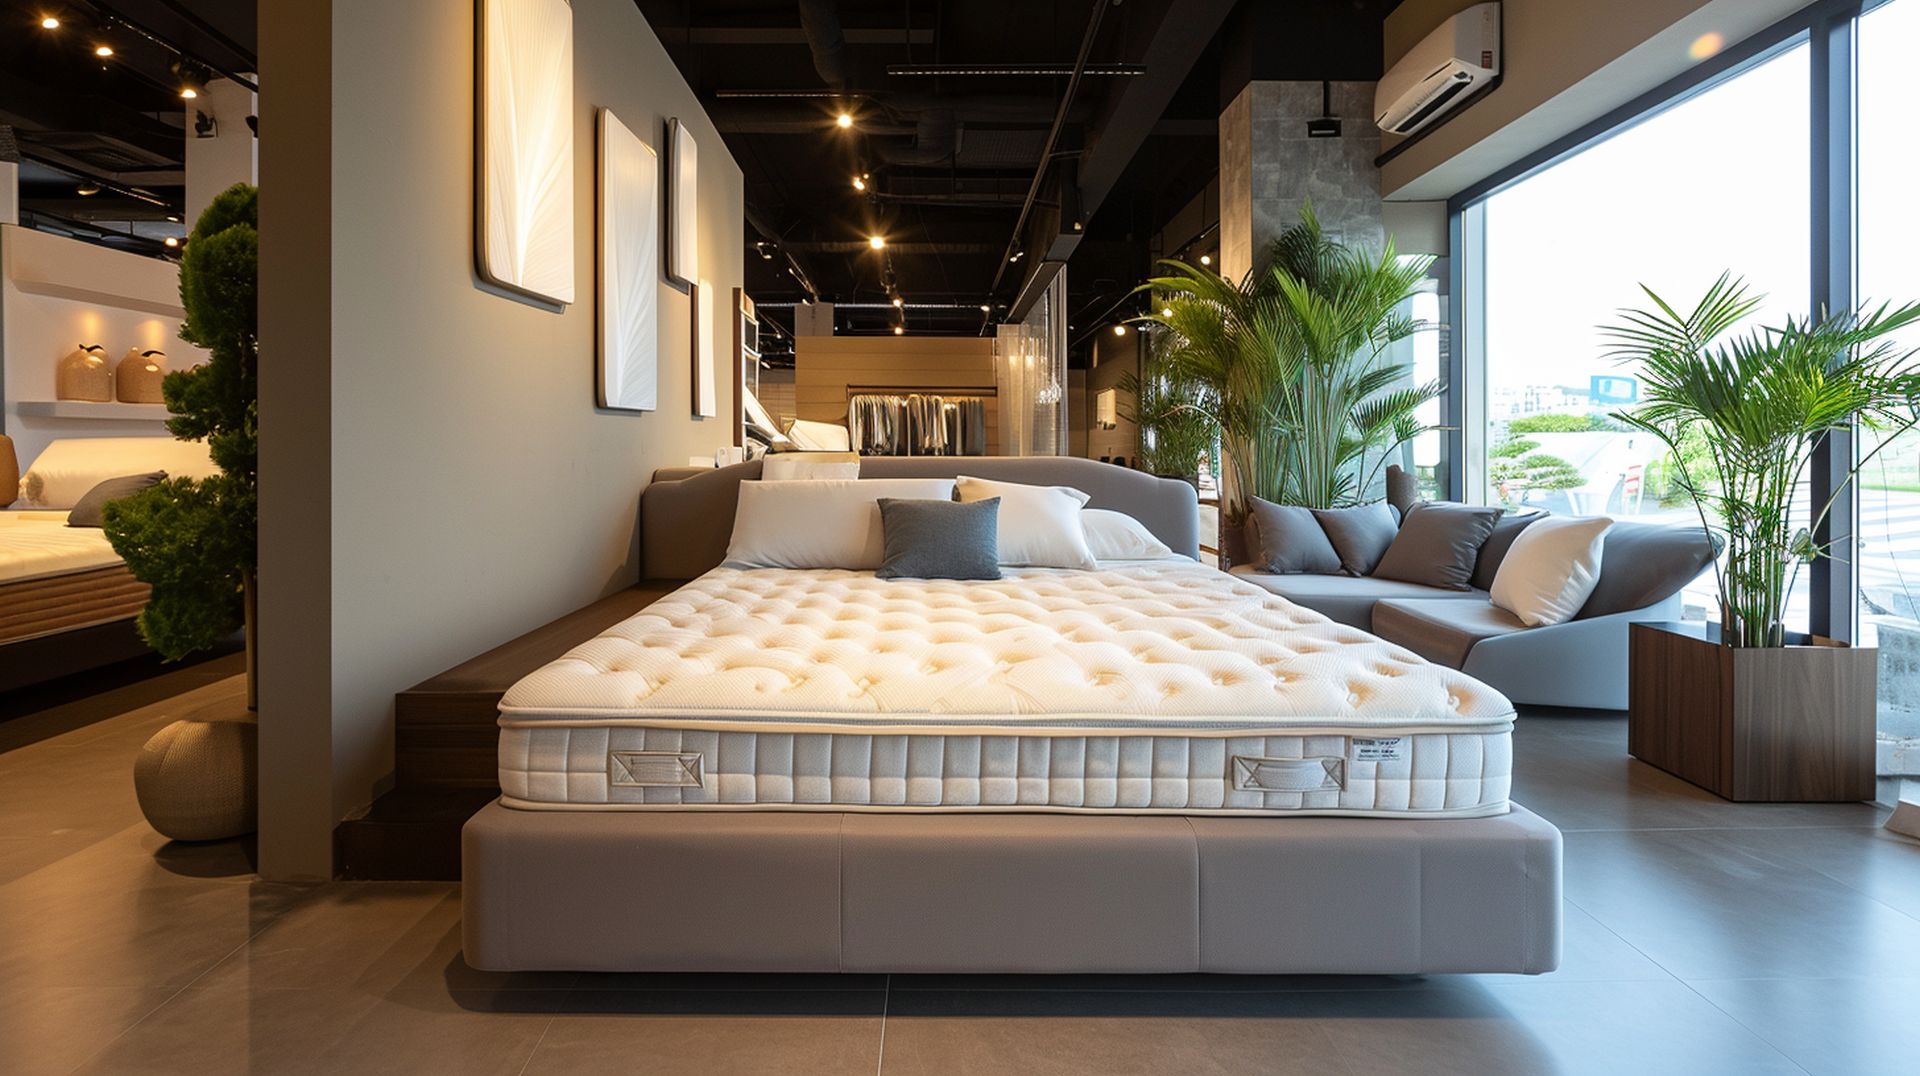 If you're looking for a new bed, mattress stores in Amarillo offer the best customer and delivery service, financing, and warranties in Texas